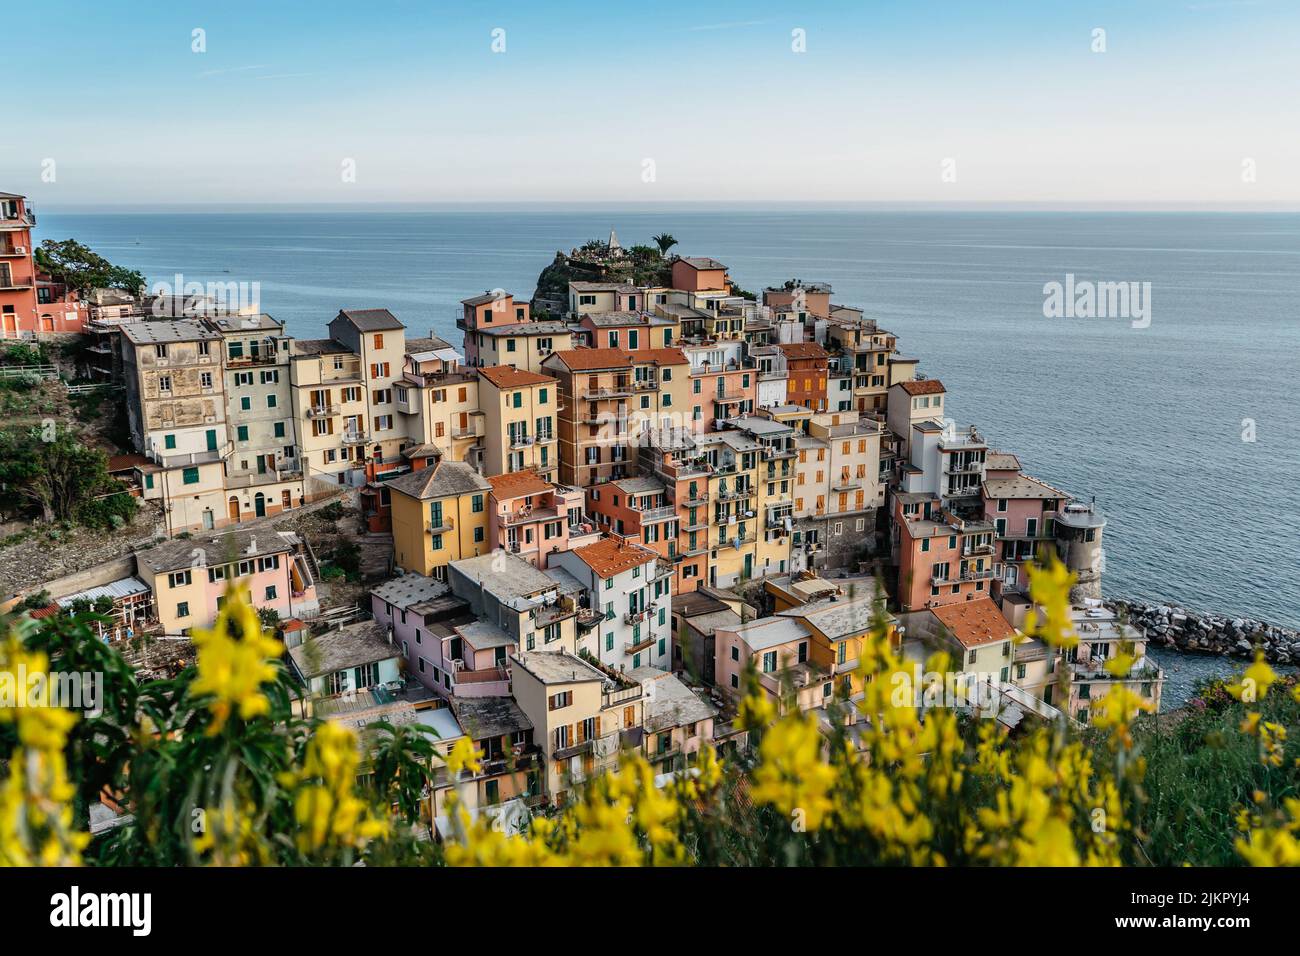 View of Manarola,Cinque Terre,Italy.UNESCO Heritage Site.Picturesque colorful village on rock above sea.Summer holiday,travel background.Italian Stock Photo